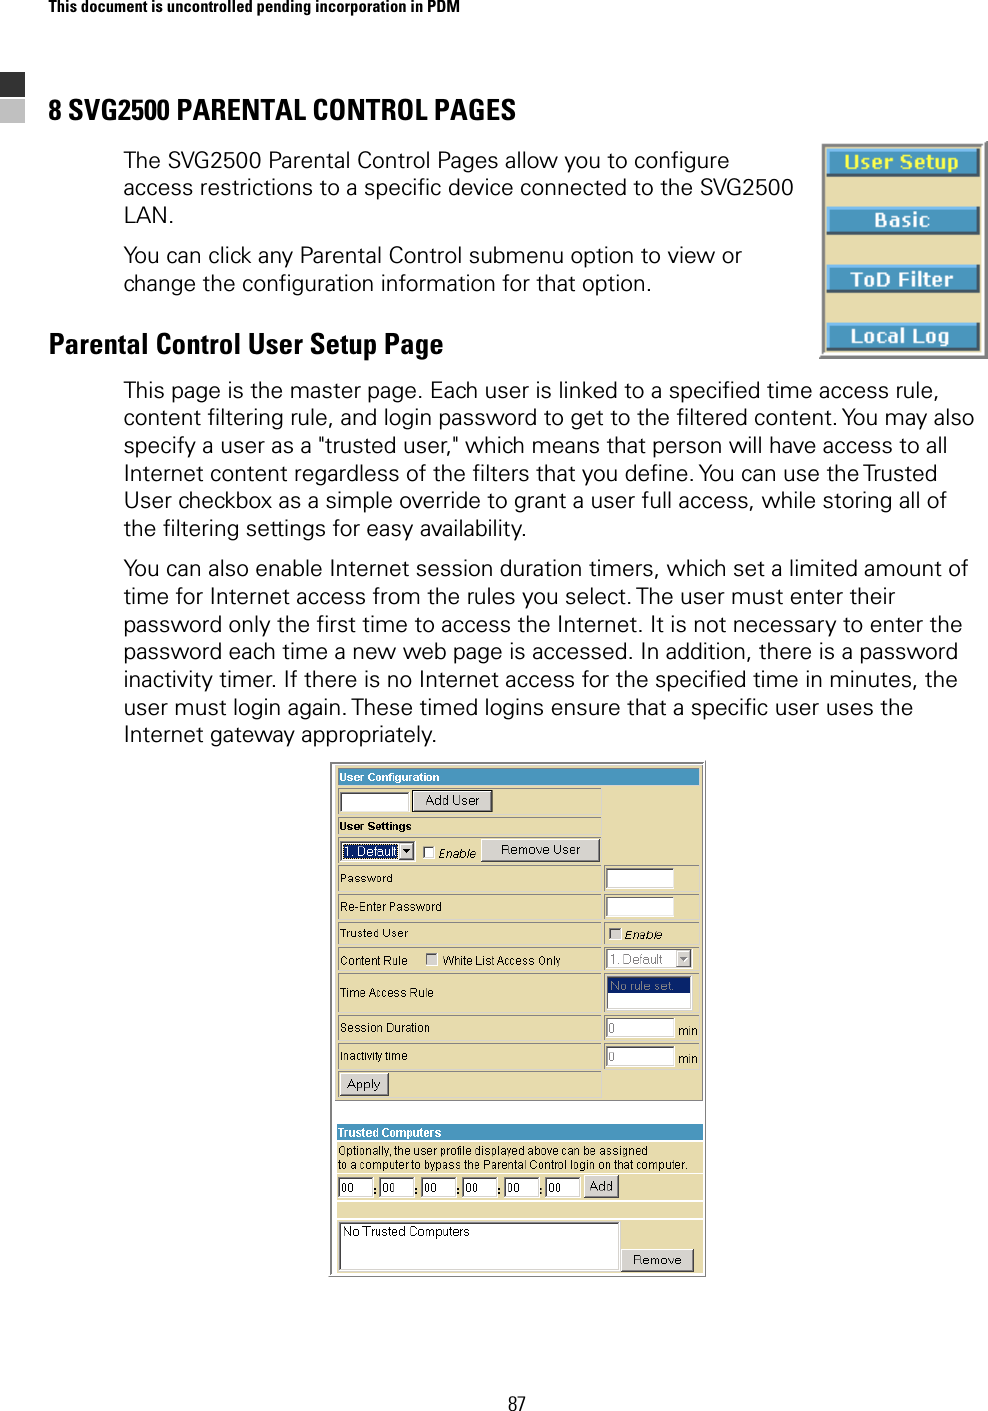 This document is uncontrolled pending incorporation in PDM  87 8 SVG2500 PARENTAL CONTROL PAGES The SVG2500 Parental Control Pages allow you to configure access restrictions to a specific device connected to the SVG2500 LAN. You can click any Parental Control submenu option to view or change the configuration information for that option. Parental Control User Setup Page This page is the master page. Each user is linked to a specified time access rule, content filtering rule, and login password to get to the filtered content. You may also specify a user as a &quot;trusted user,&quot; which means that person will have access to all Internet content regardless of the filters that you define. You can use the Trusted User checkbox as a simple override to grant a user full access, while storing all of the filtering settings for easy availability.  You can also enable Internet session duration timers, which set a limited amount of time for Internet access from the rules you select. The user must enter their password only the first time to access the Internet. It is not necessary to enter the password each time a new web page is accessed. In addition, there is a password inactivity timer. If there is no Internet access for the specified time in minutes, the user must login again. These timed logins ensure that a specific user uses the Internet gateway appropriately.  